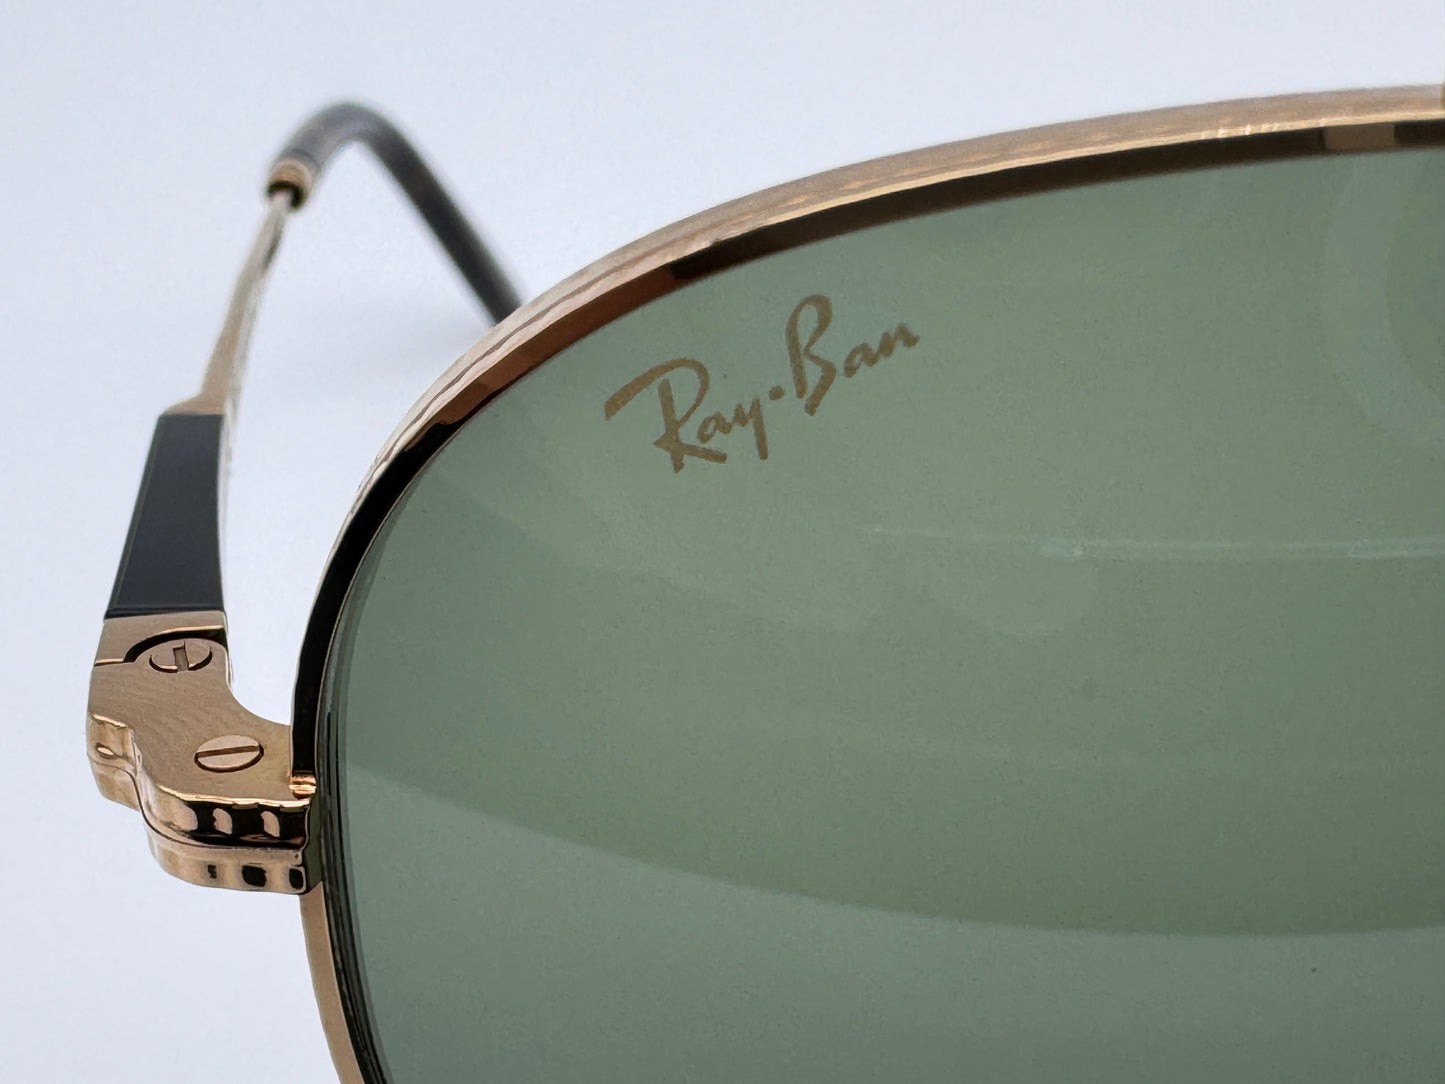 Ray Ban AVIATOR II 58mm TITANIUM RB 8225 Gold / Green 313852 Made in Japan Missing Box